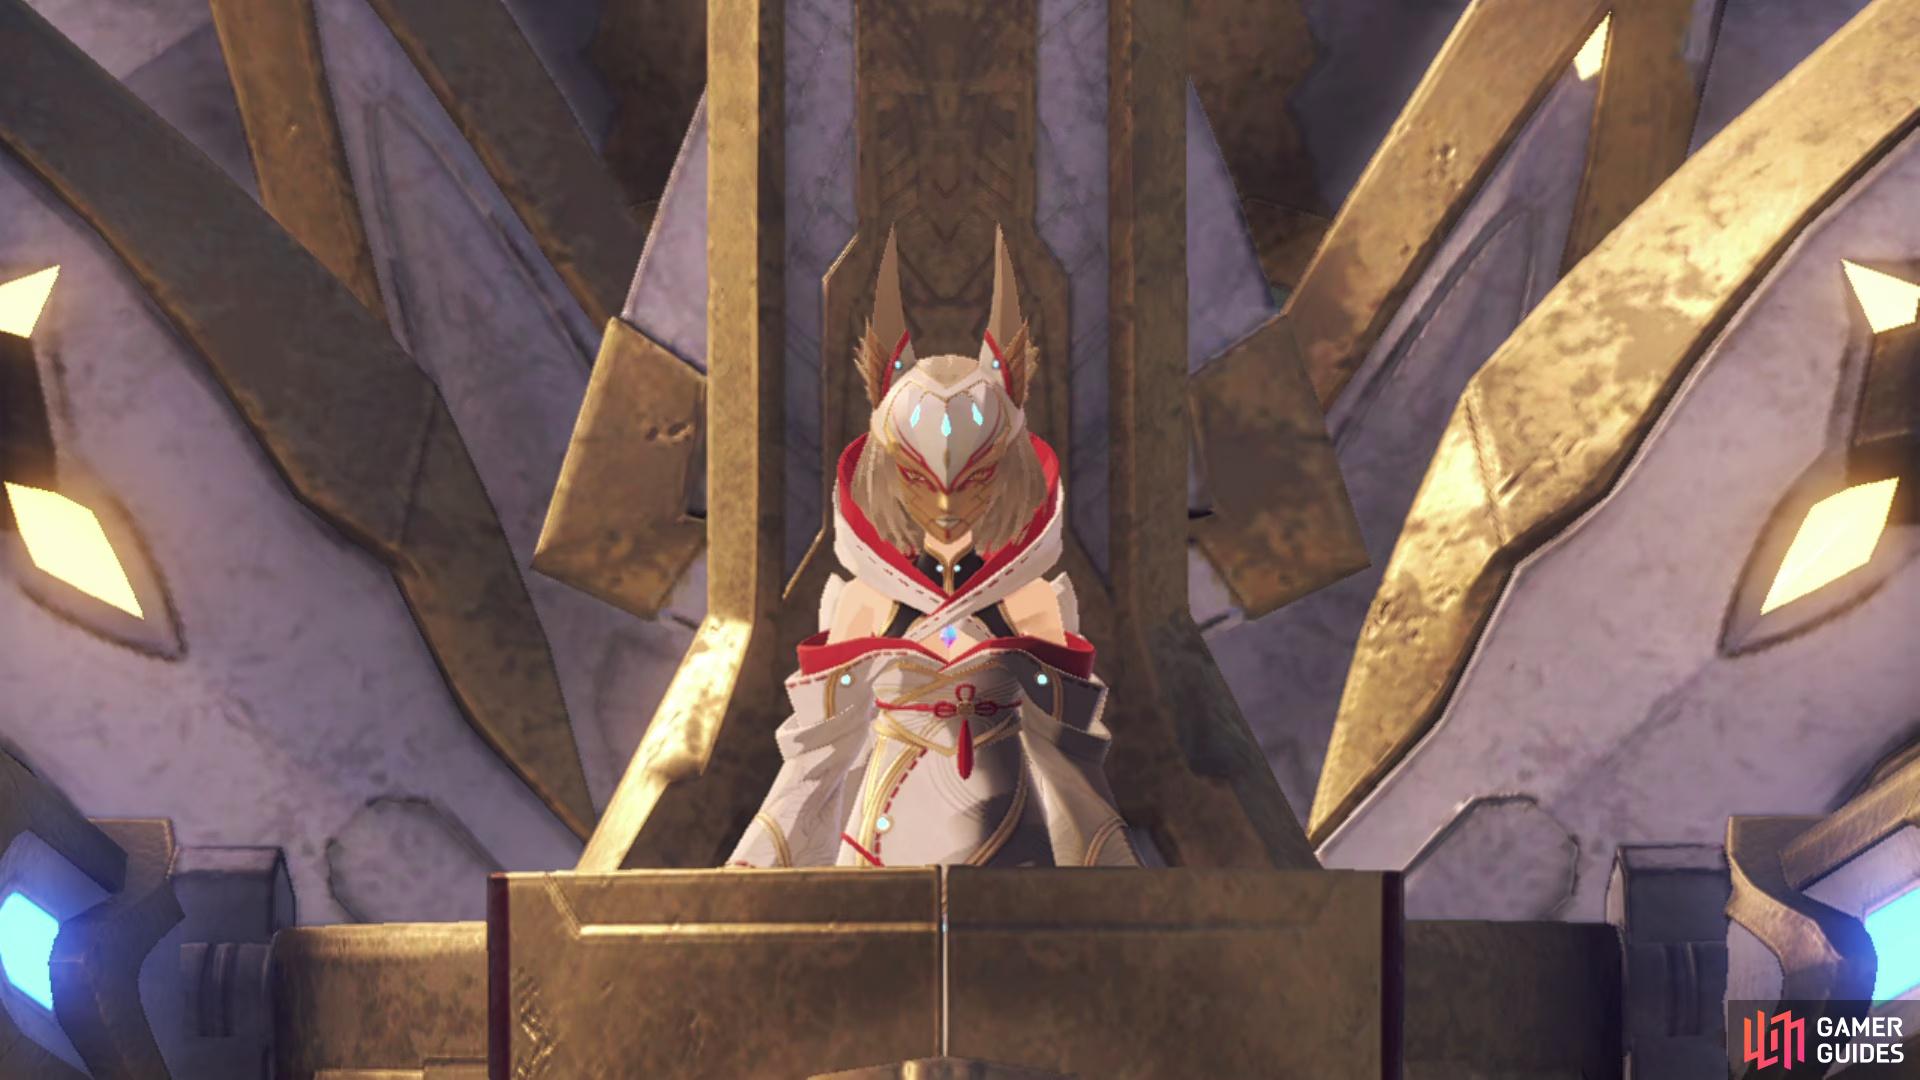 The Queen of Agnus is a boss in Chapter 6 of Xenoblade Chronicles 3.